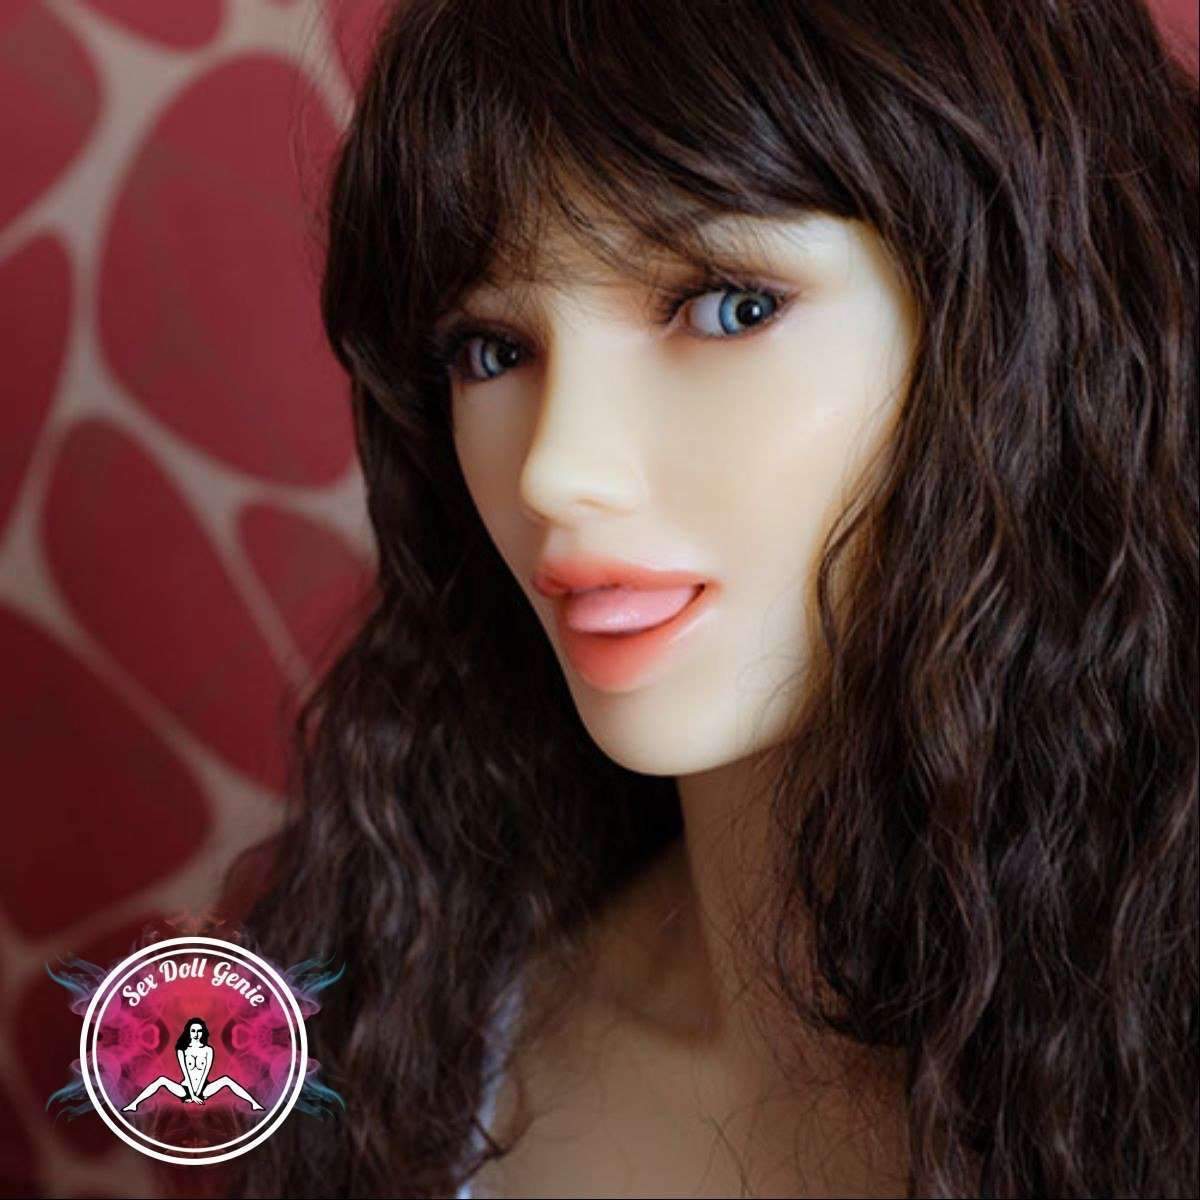 DS Doll - 163 - Penny Head - Type 1 D Cup Silicone Doll-13